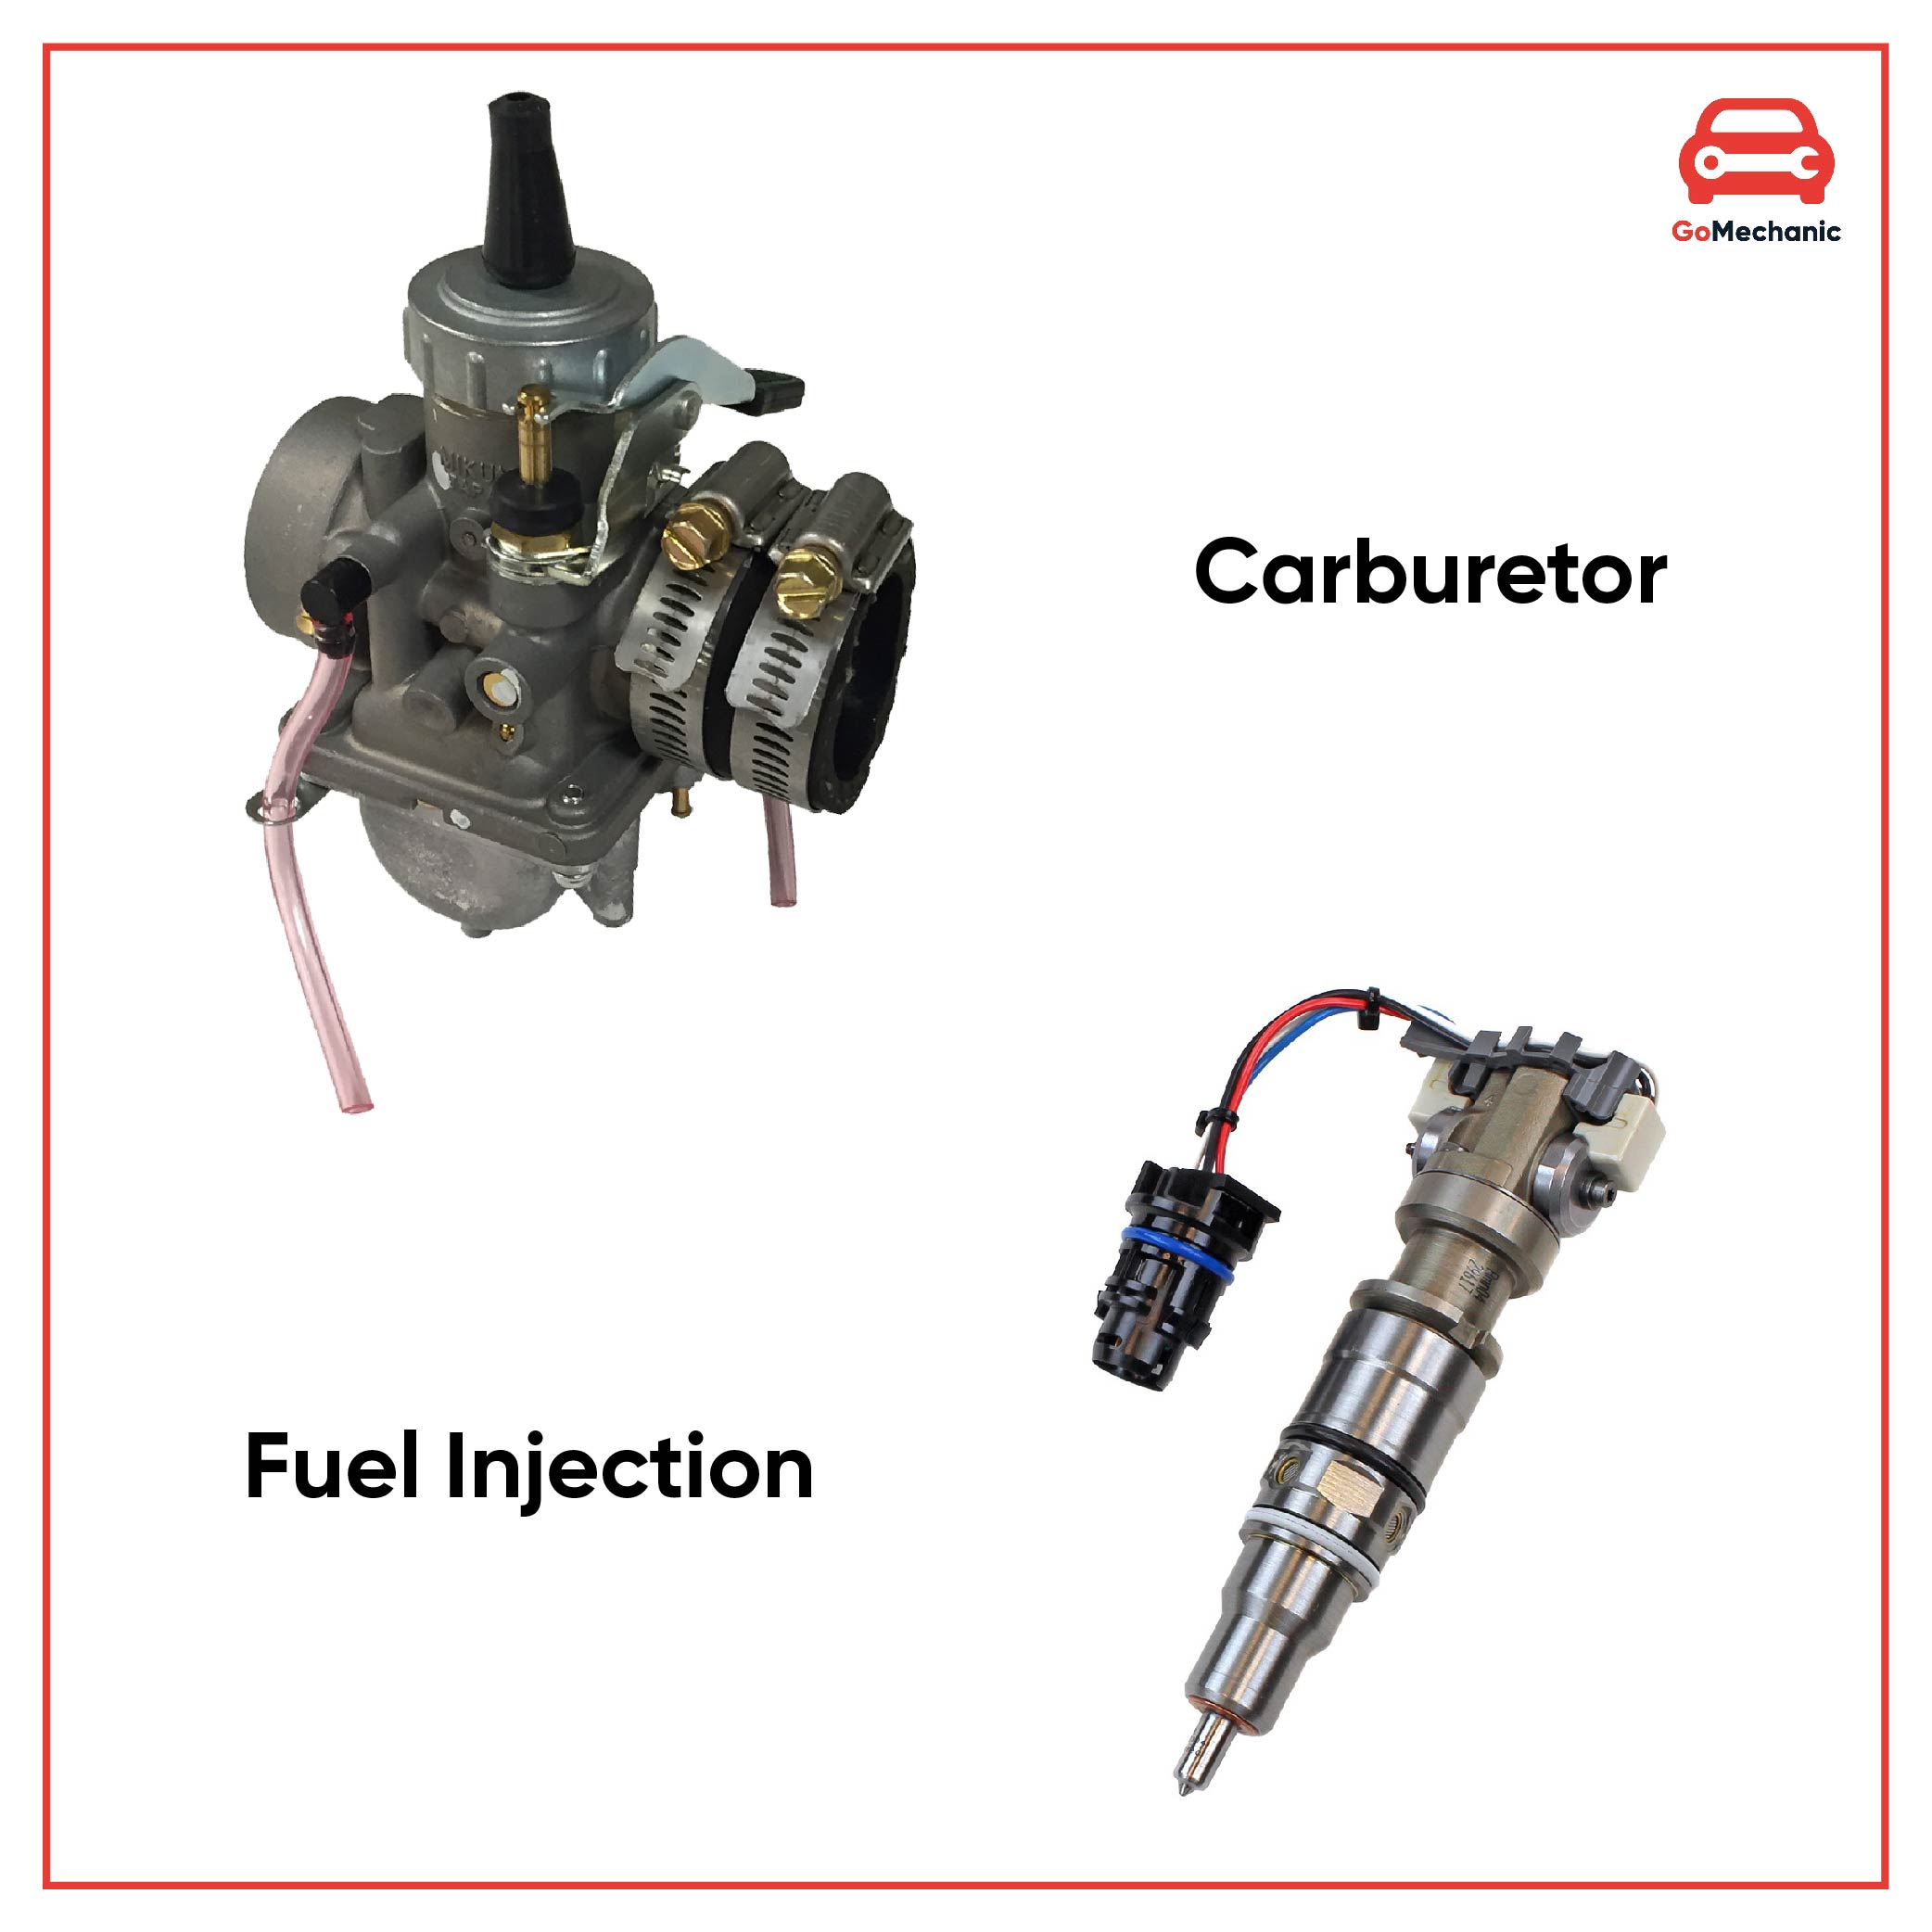 Carburetor Vs Fuel Injection | What’s The Difference?